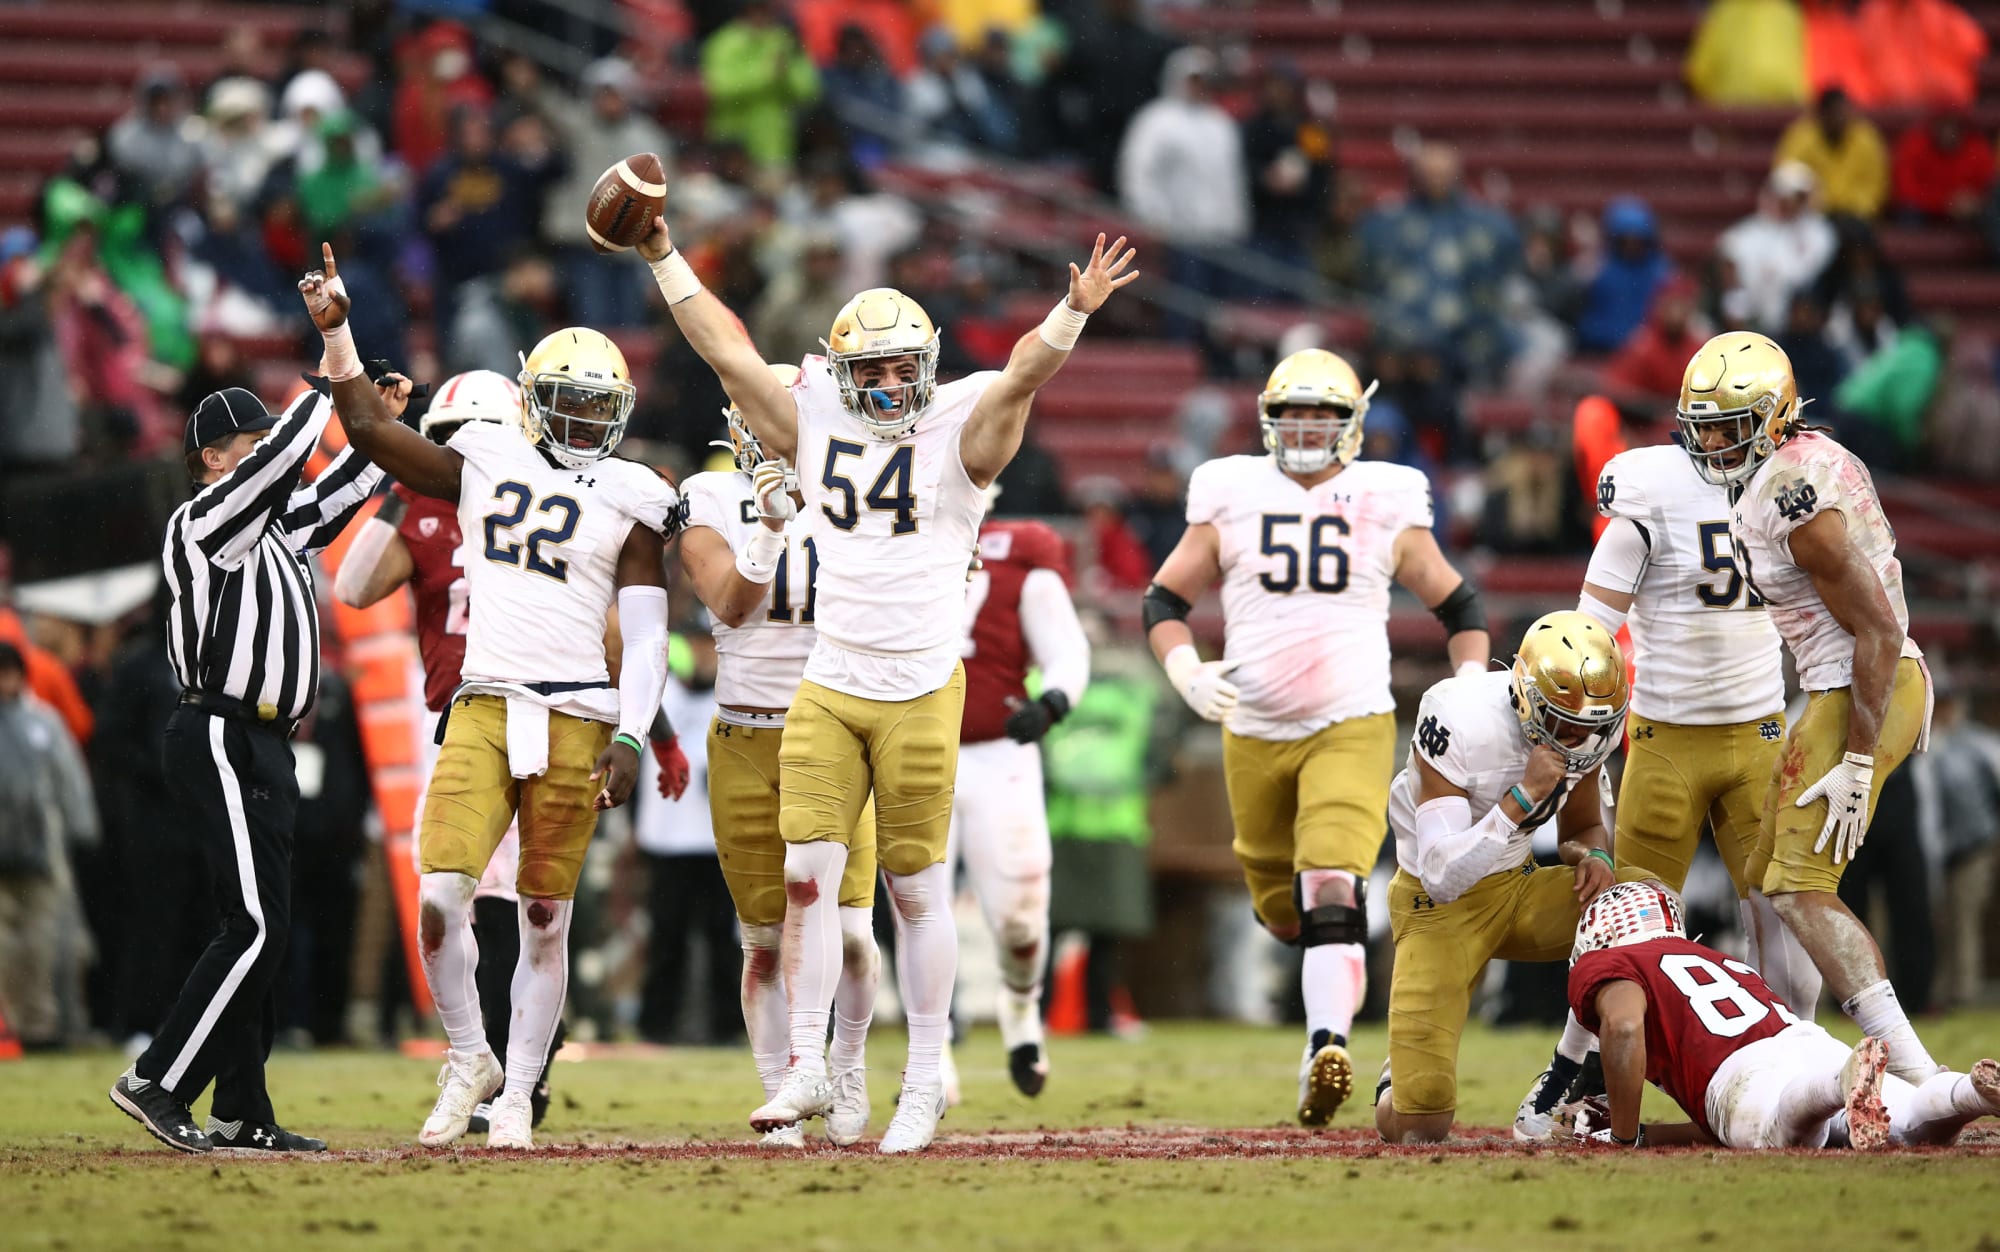 Notre Dame The play that changed everything vs. Stanford